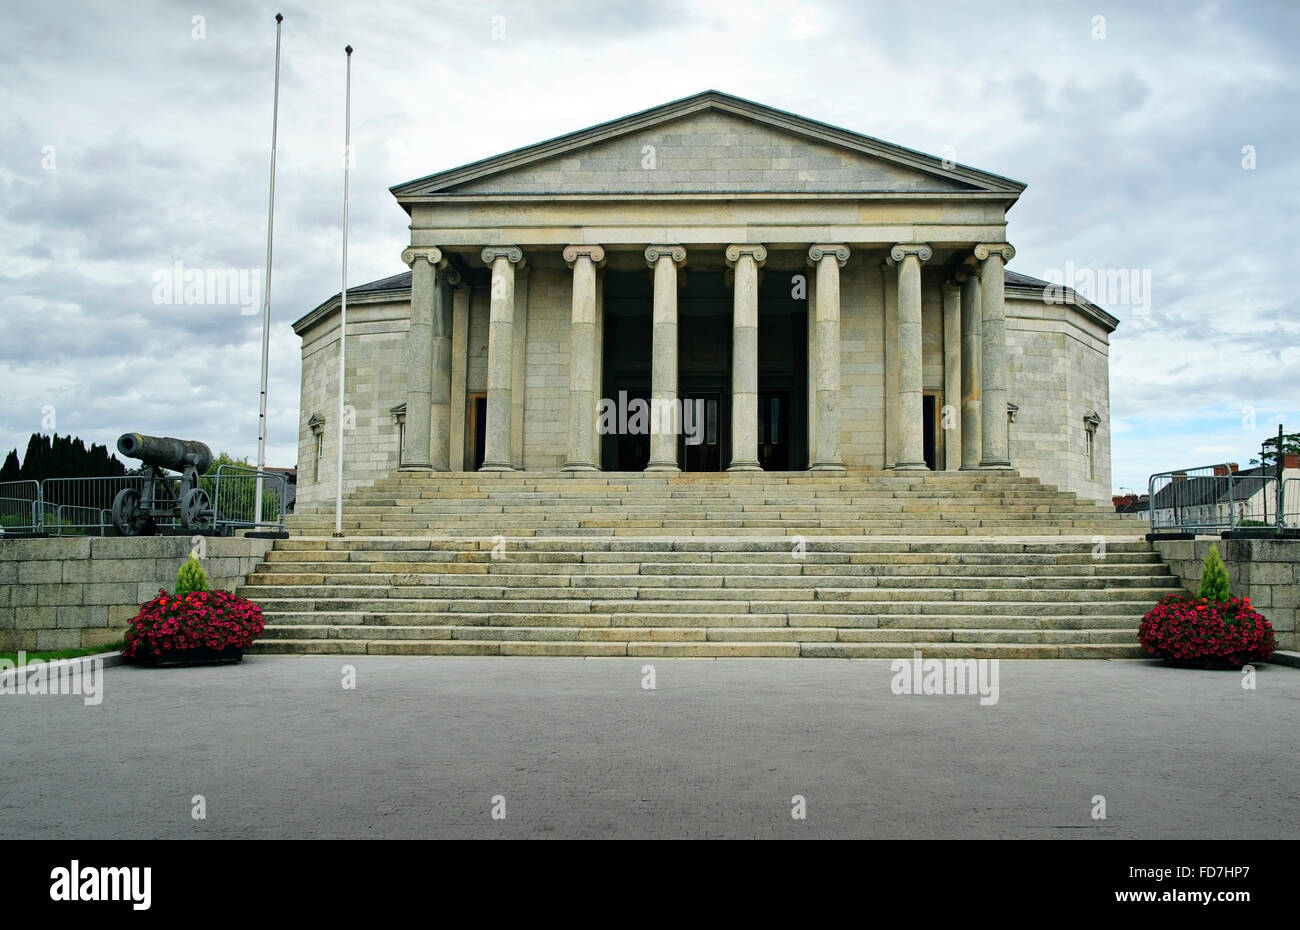 Carlow Court House building Ireland front view showing the massive portico and ionic columns Stock Photo